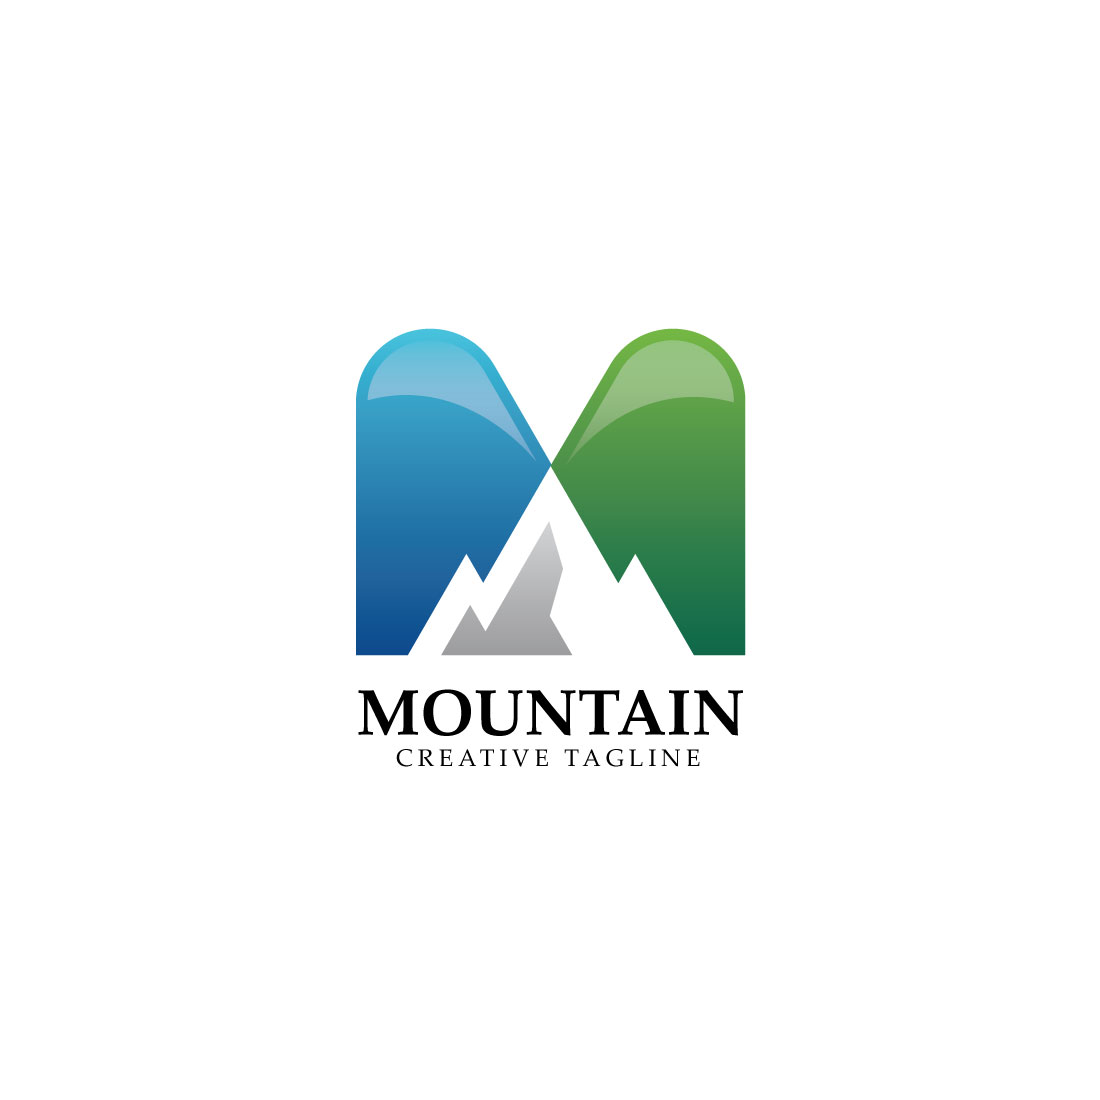 Mountain - Letter M Logo cover image.